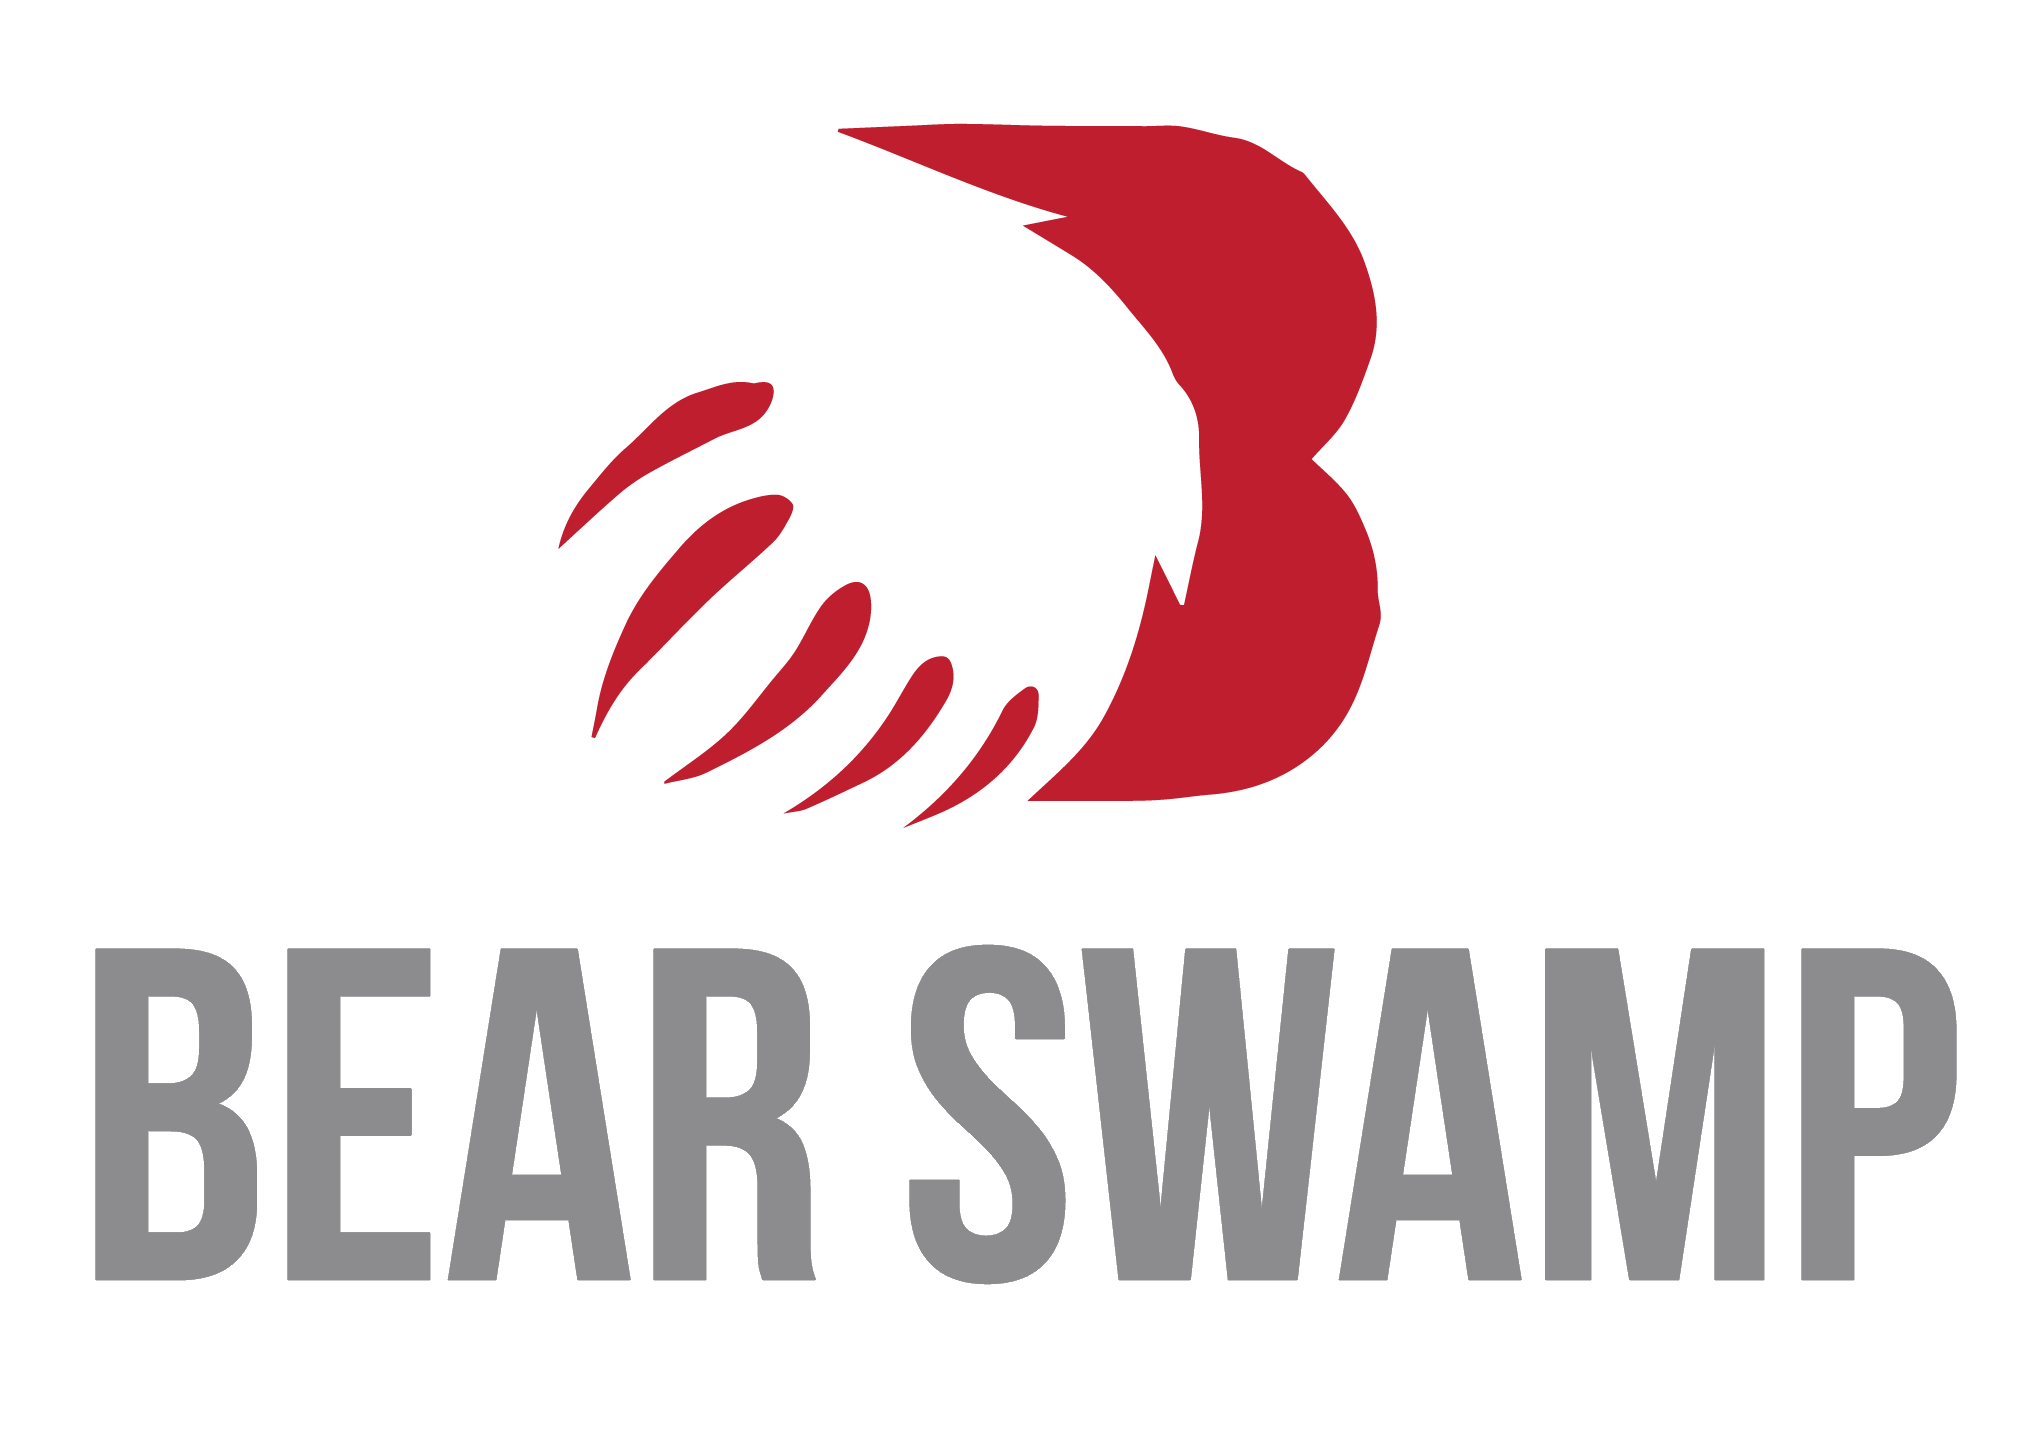 Bear Swamp-01_png - SIMPLE EDITED LOGO_png cropped (1).png